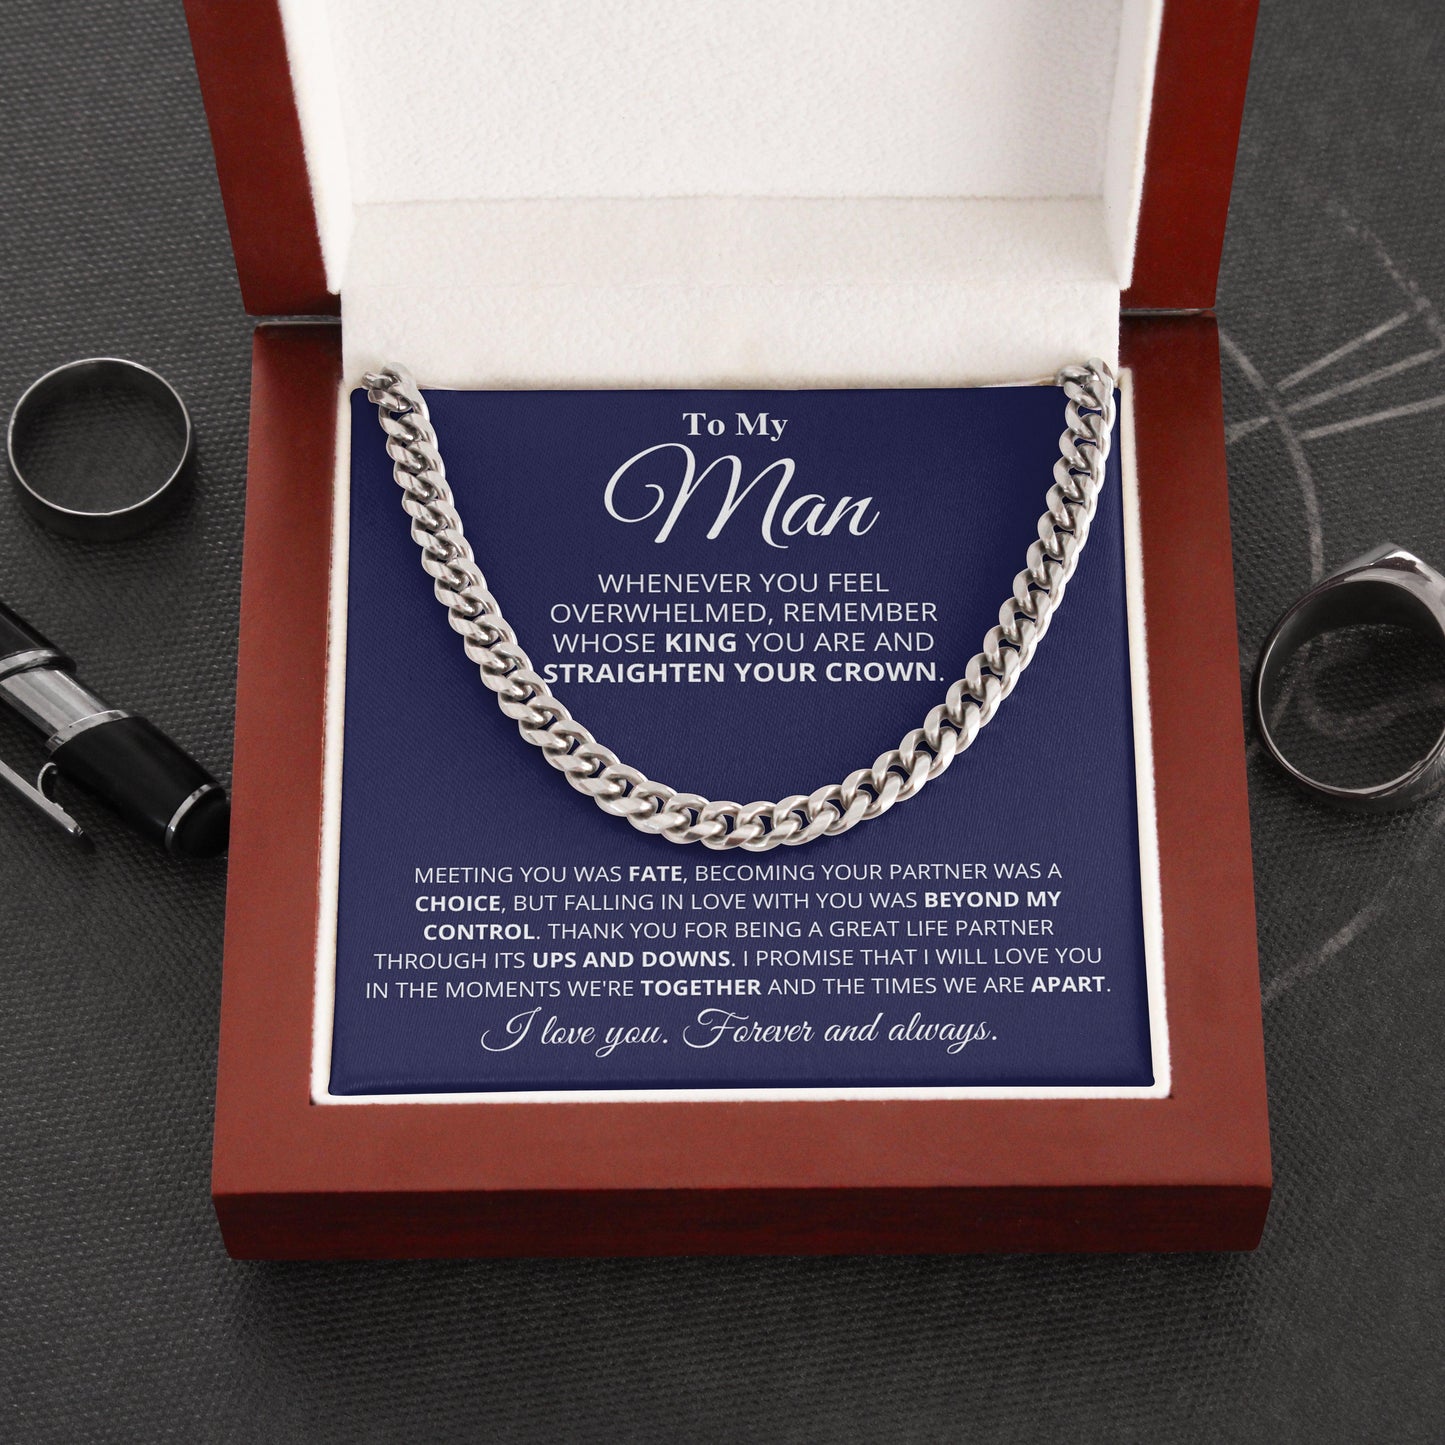 Jewelry gifts My Man - My Choice - Cuban Link Chain - Belesmé - Memorable Jewelry Gifts 